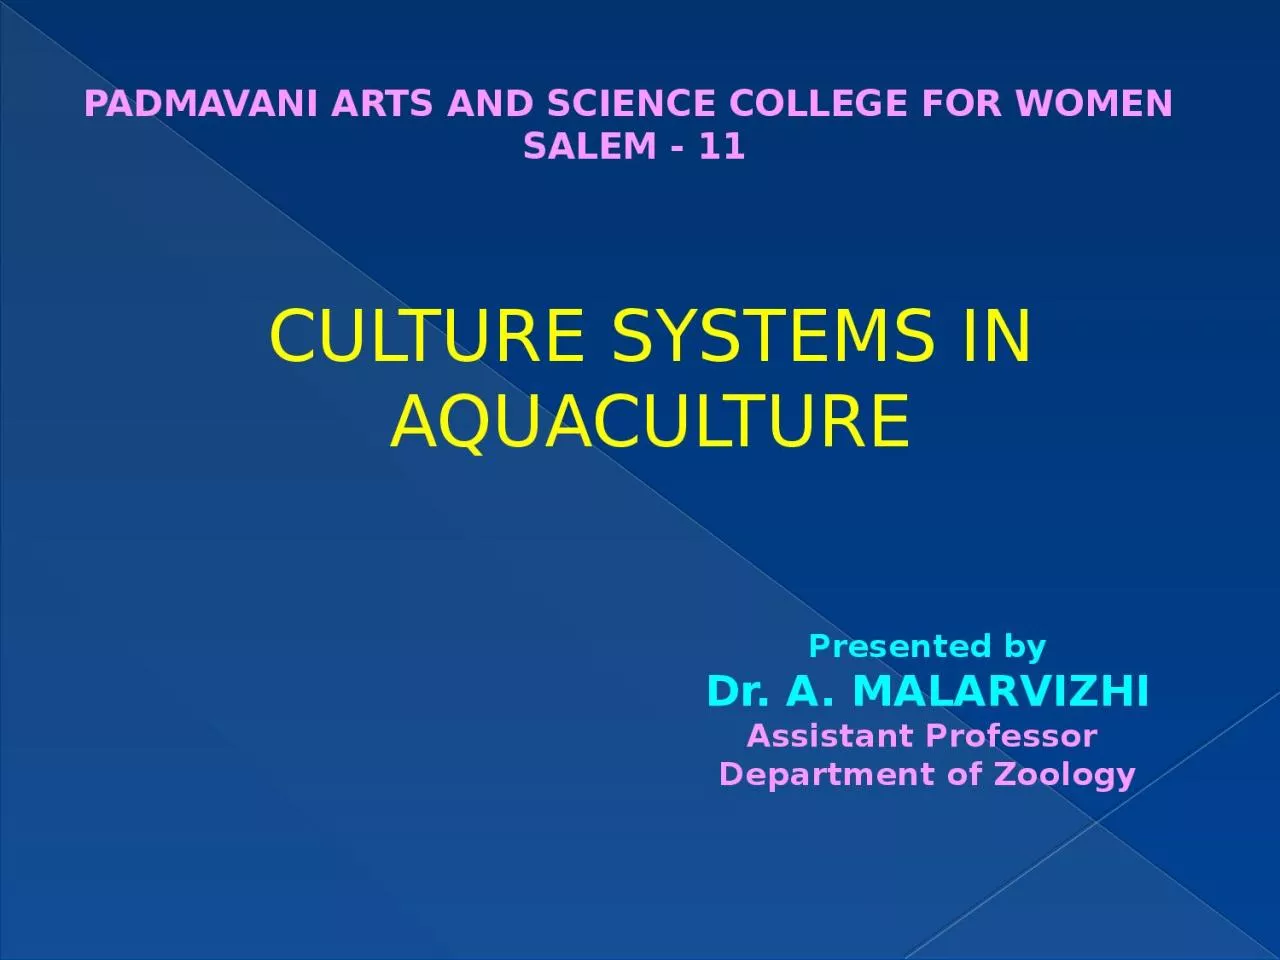 CULTURE SYSTEMS IN AQUACULTURE